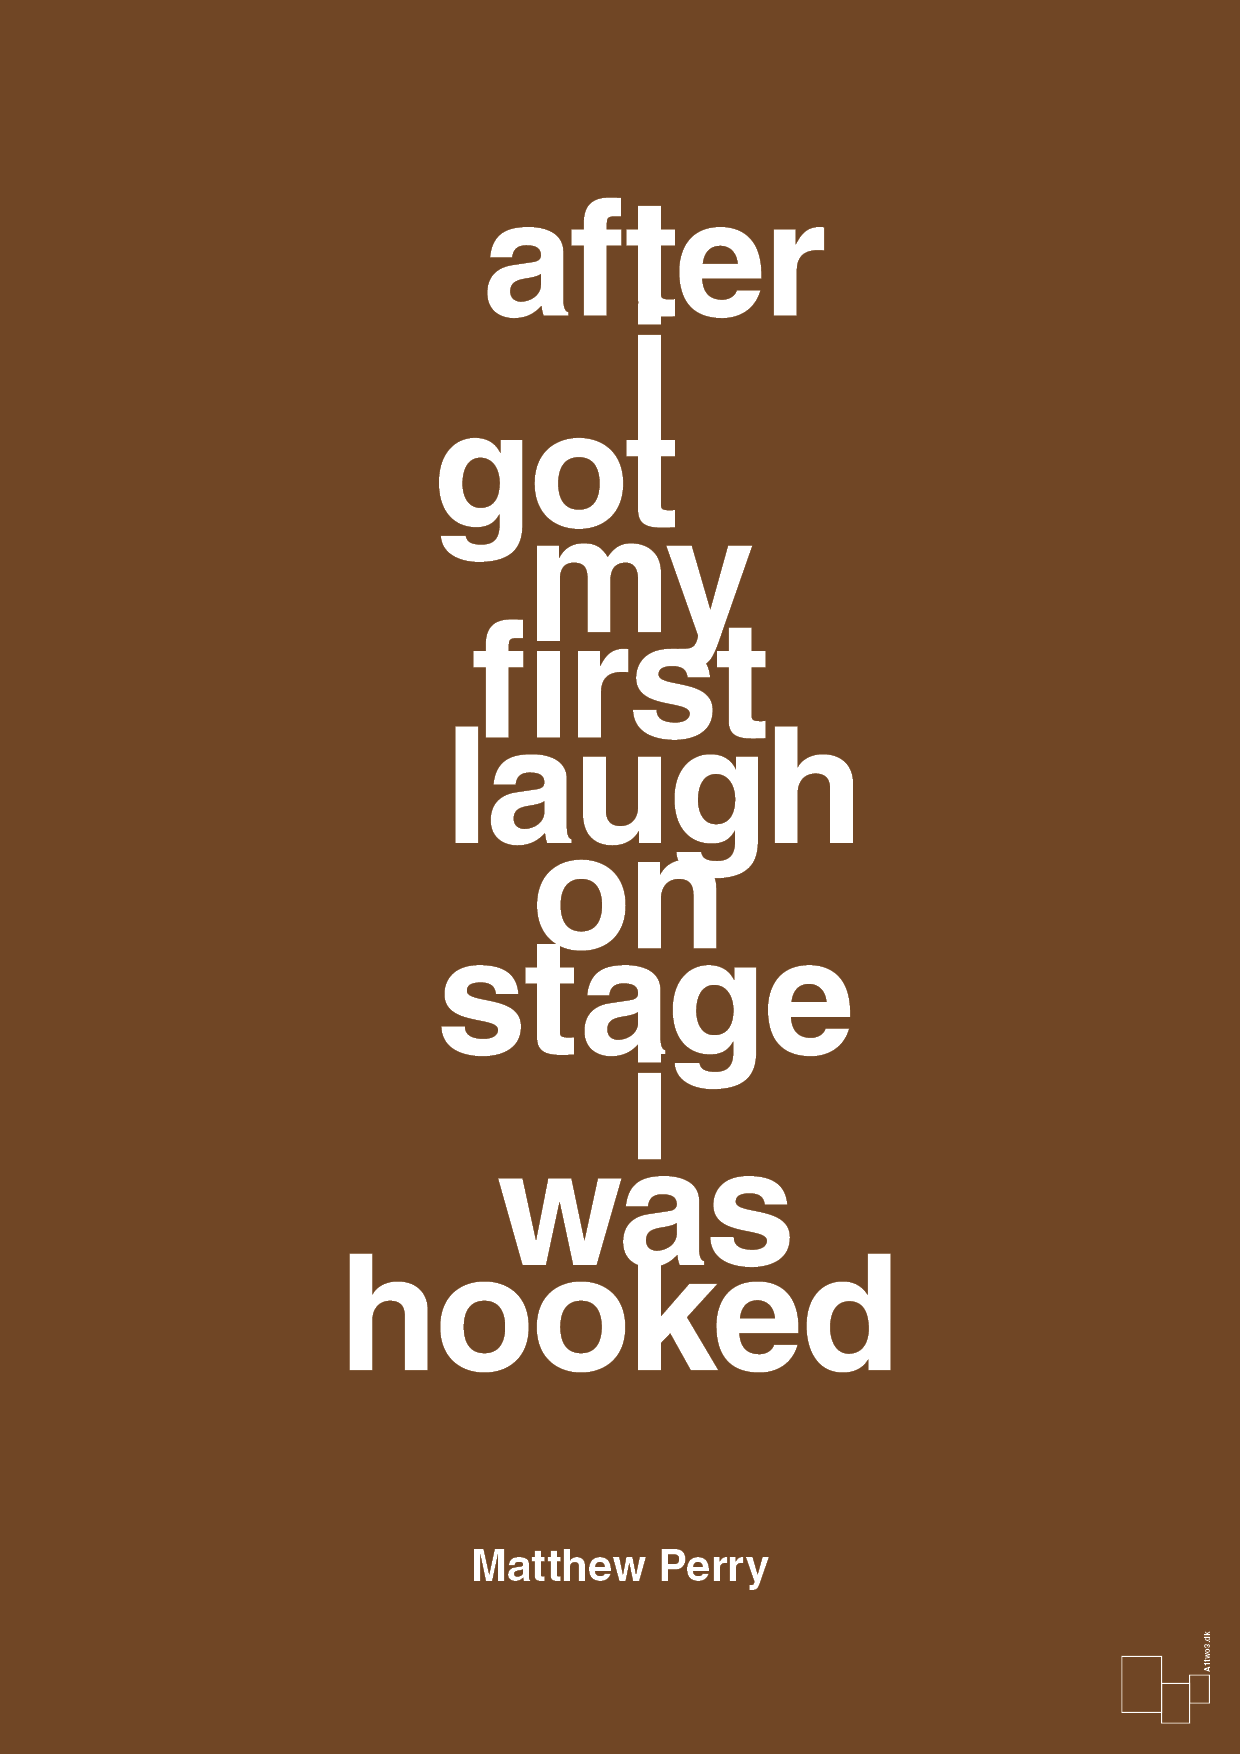 after i got my first laugh on stage i was hooked - Plakat med Citater i Dark Brown